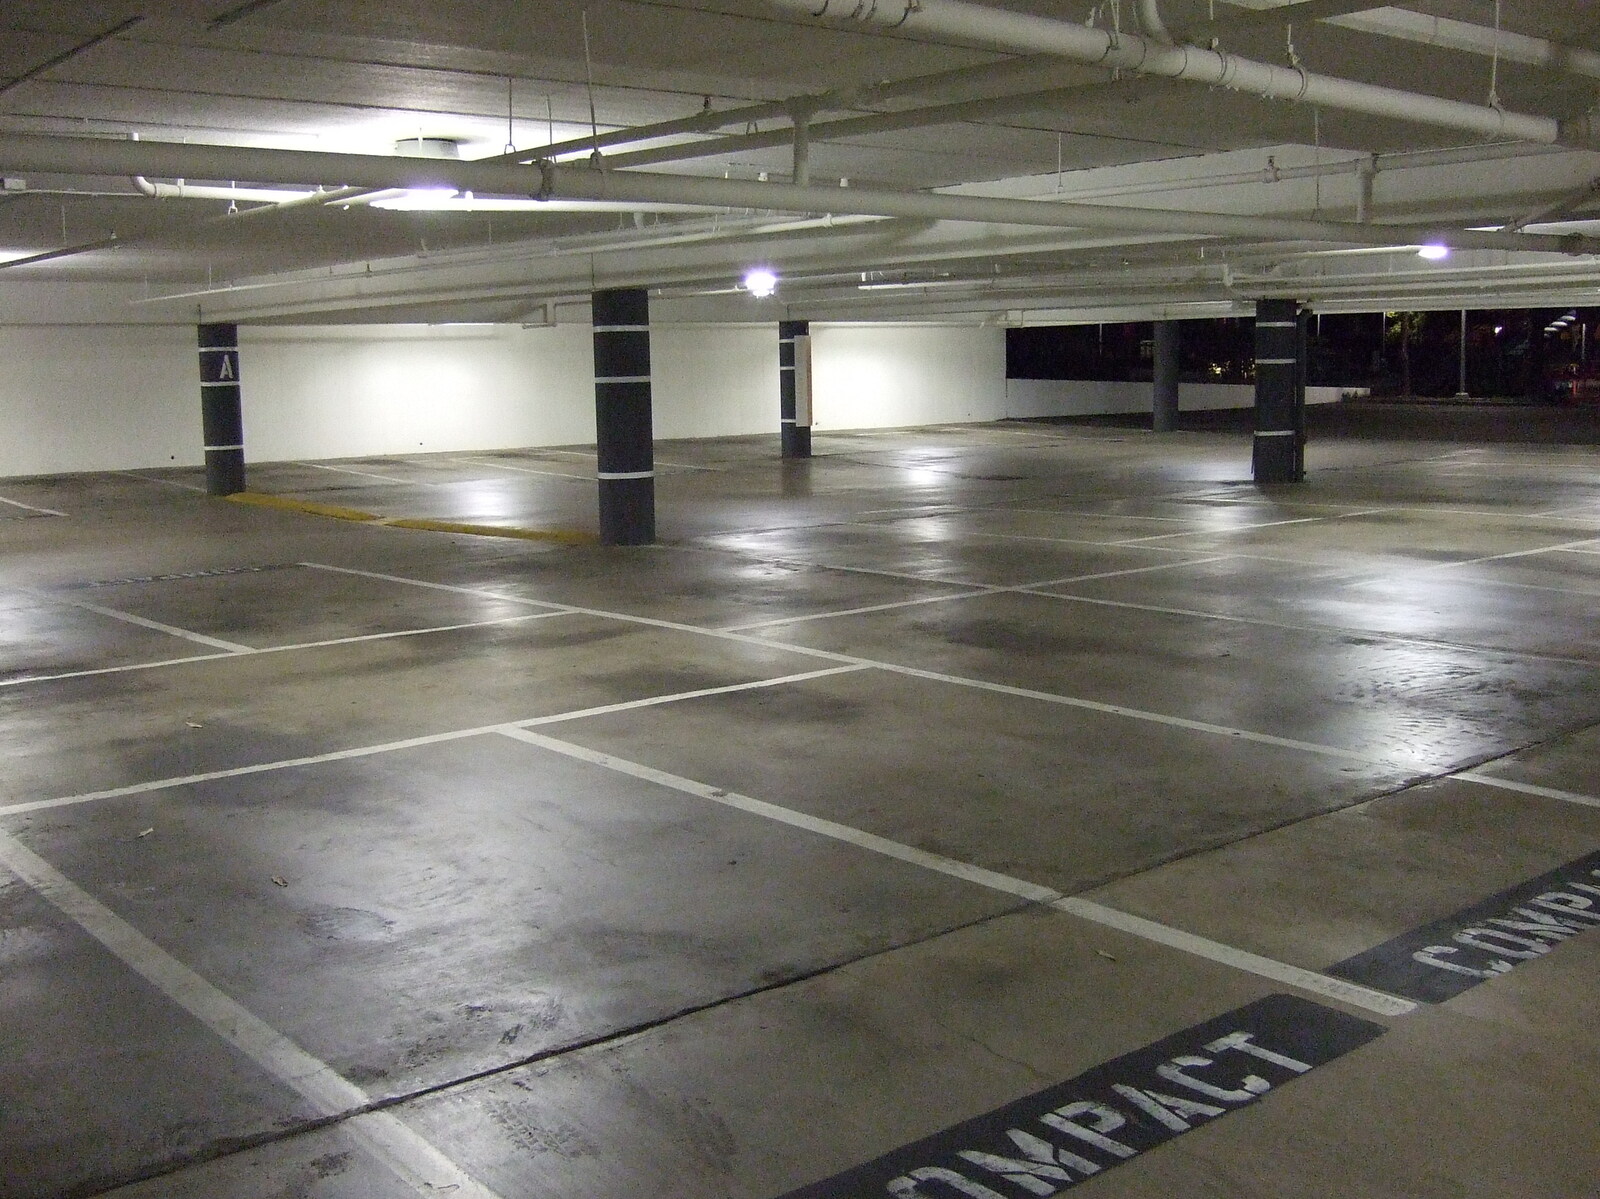 San Diego and Hollywood, California, US - 3rd March 2008: The UCSD car park is deserted at night